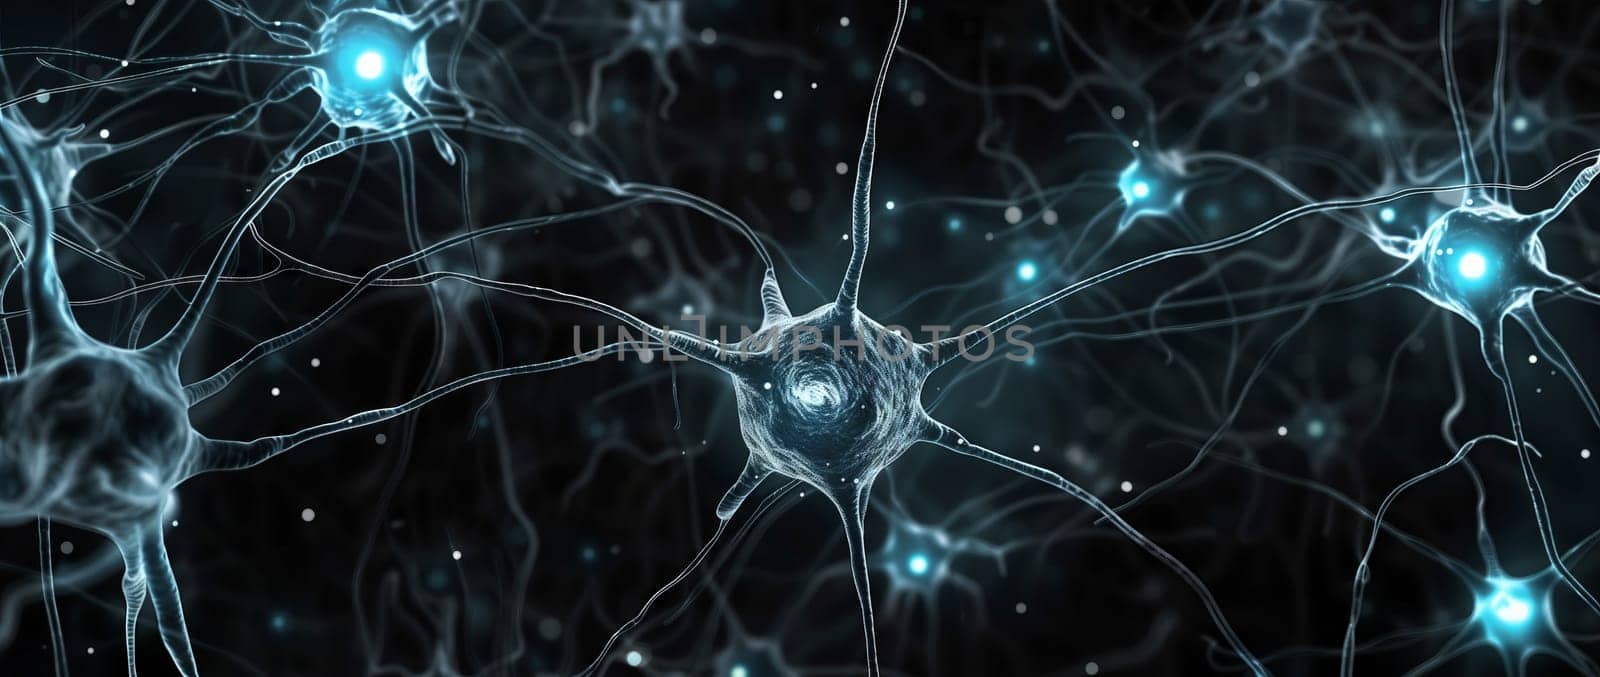 a computer generated image of a network of neurons in the brain by richwolf